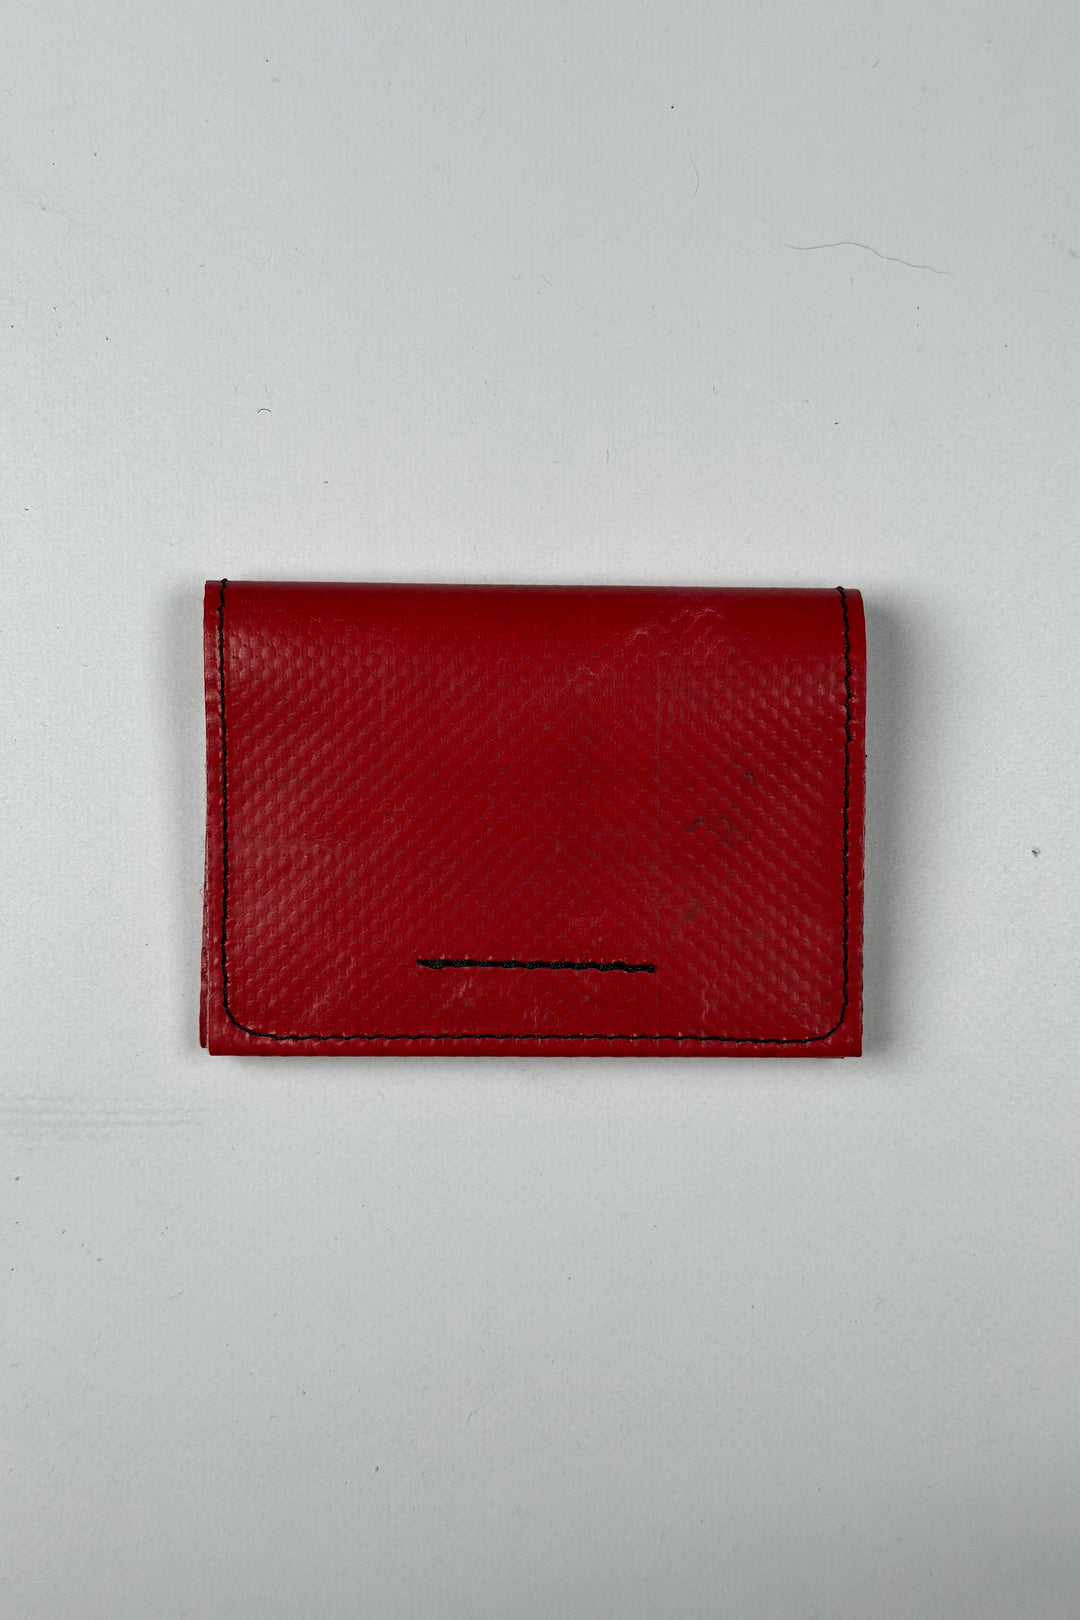 LAZARUS F280 Wallet Extra Small